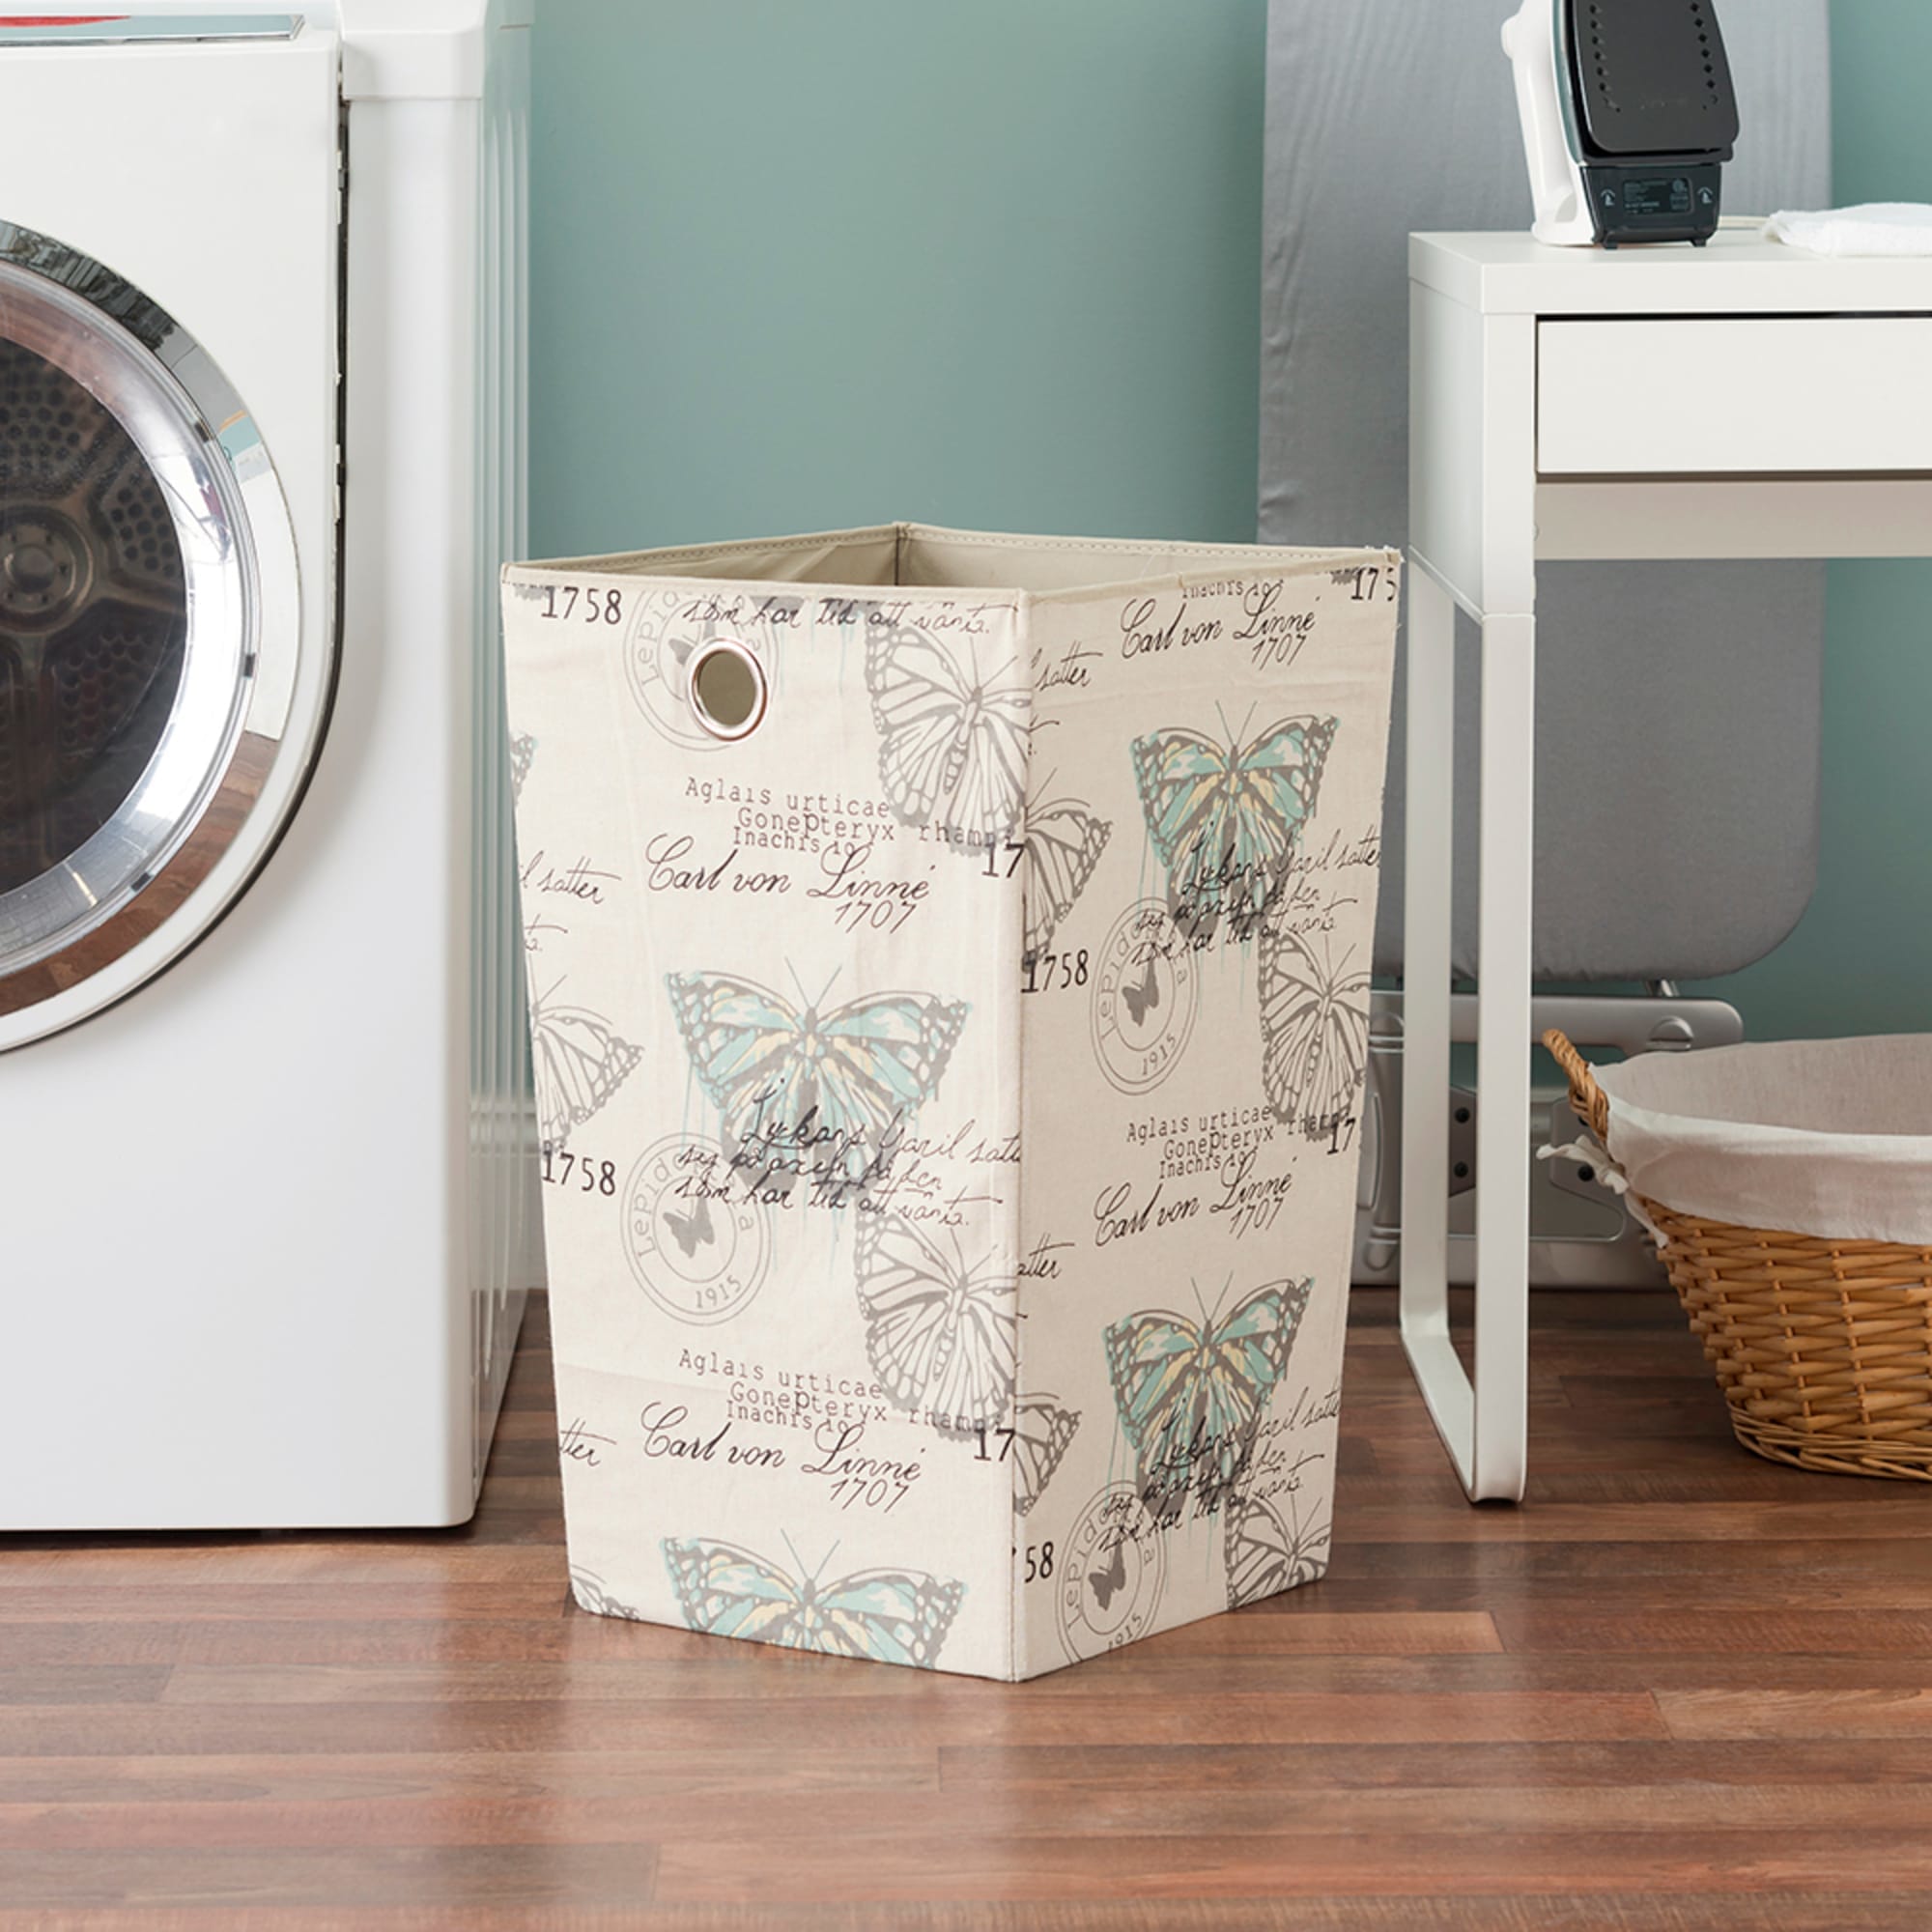 Home Basics Vintage Butterfly Collection Laundry Hamper $10.00 EACH, CASE PACK OF 6